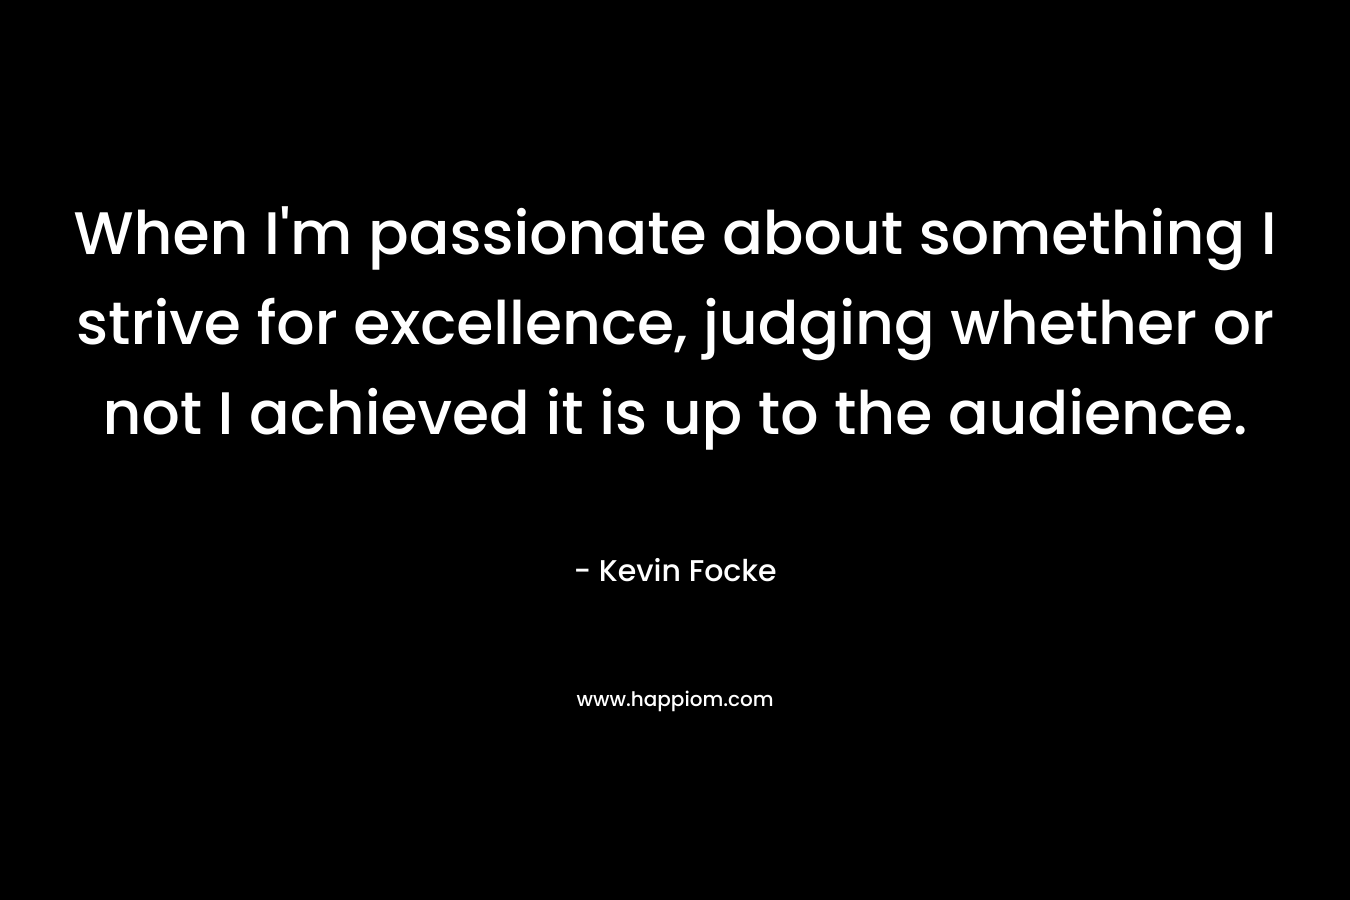 When I'm passionate about something I strive for excellence, judging whether or not I achieved it is up to the audience.